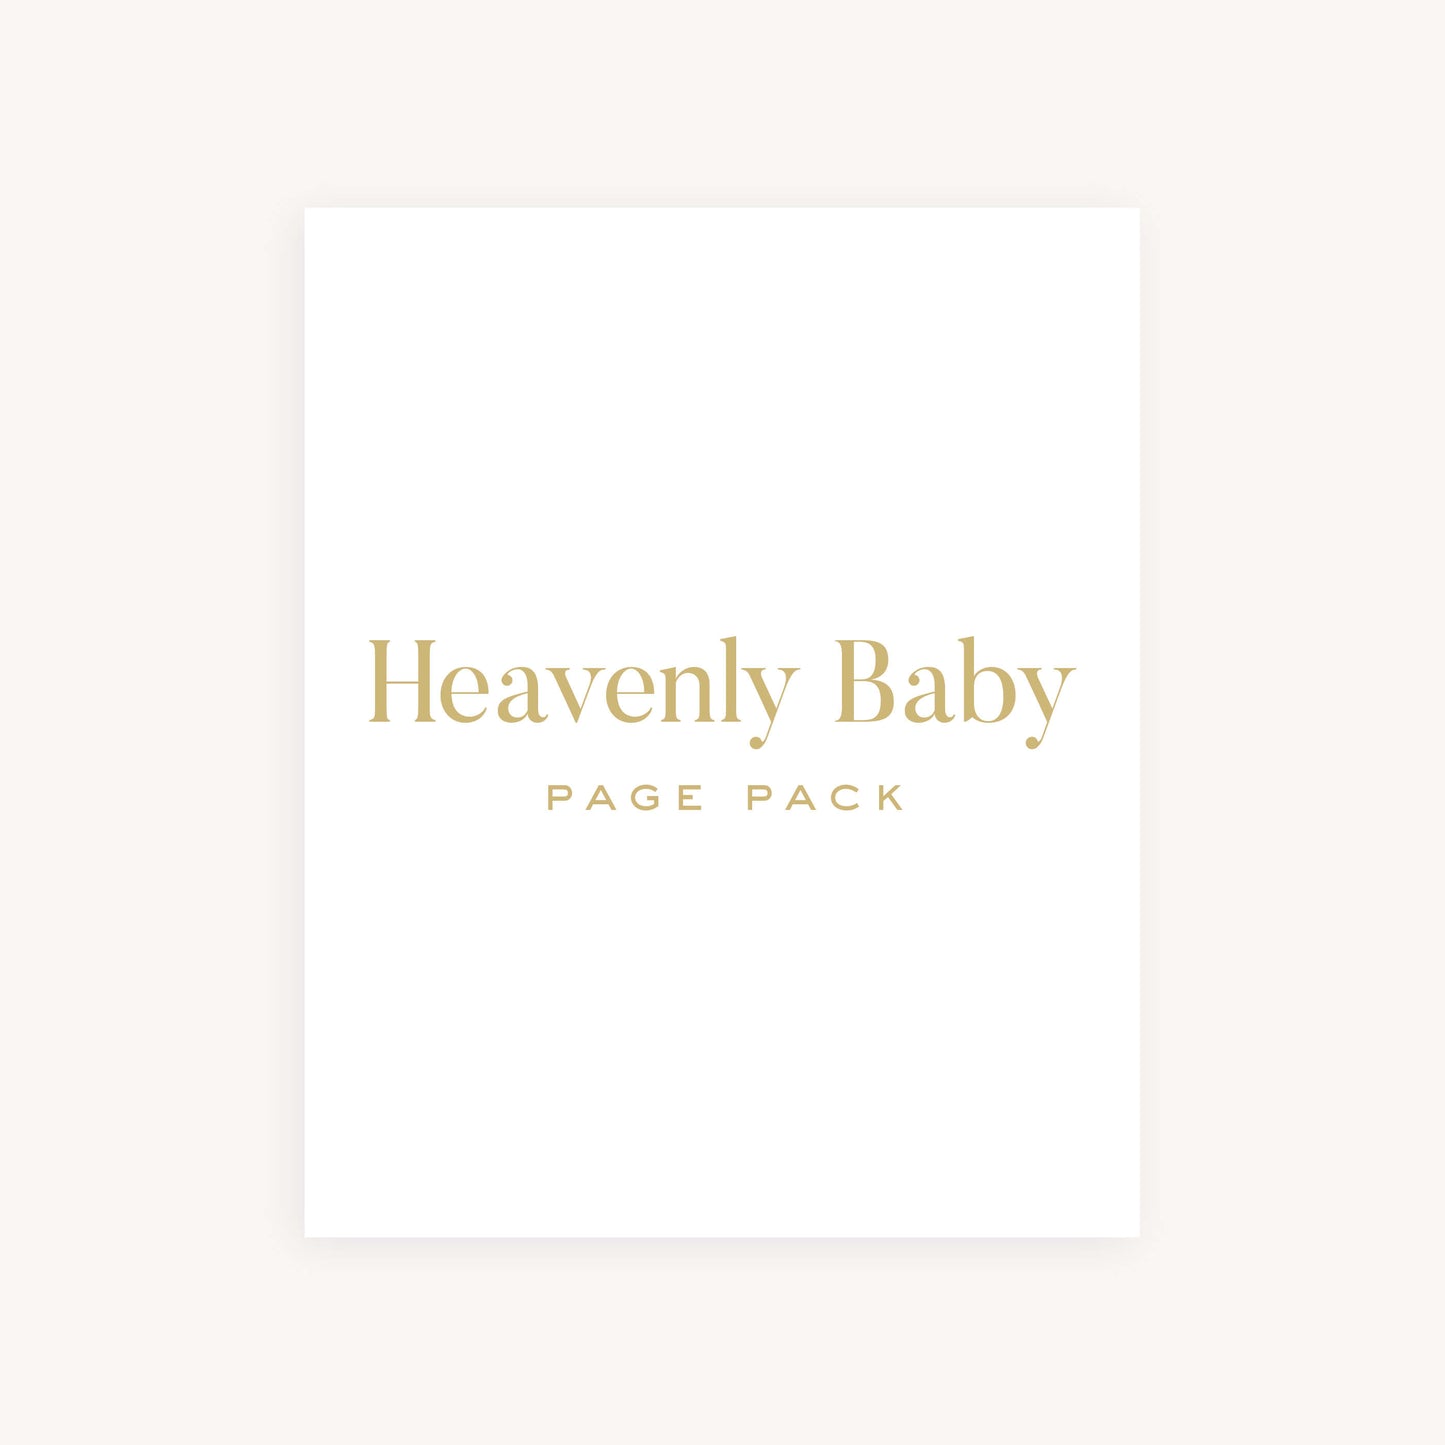 HEAVENLY BABY PAGE PACK